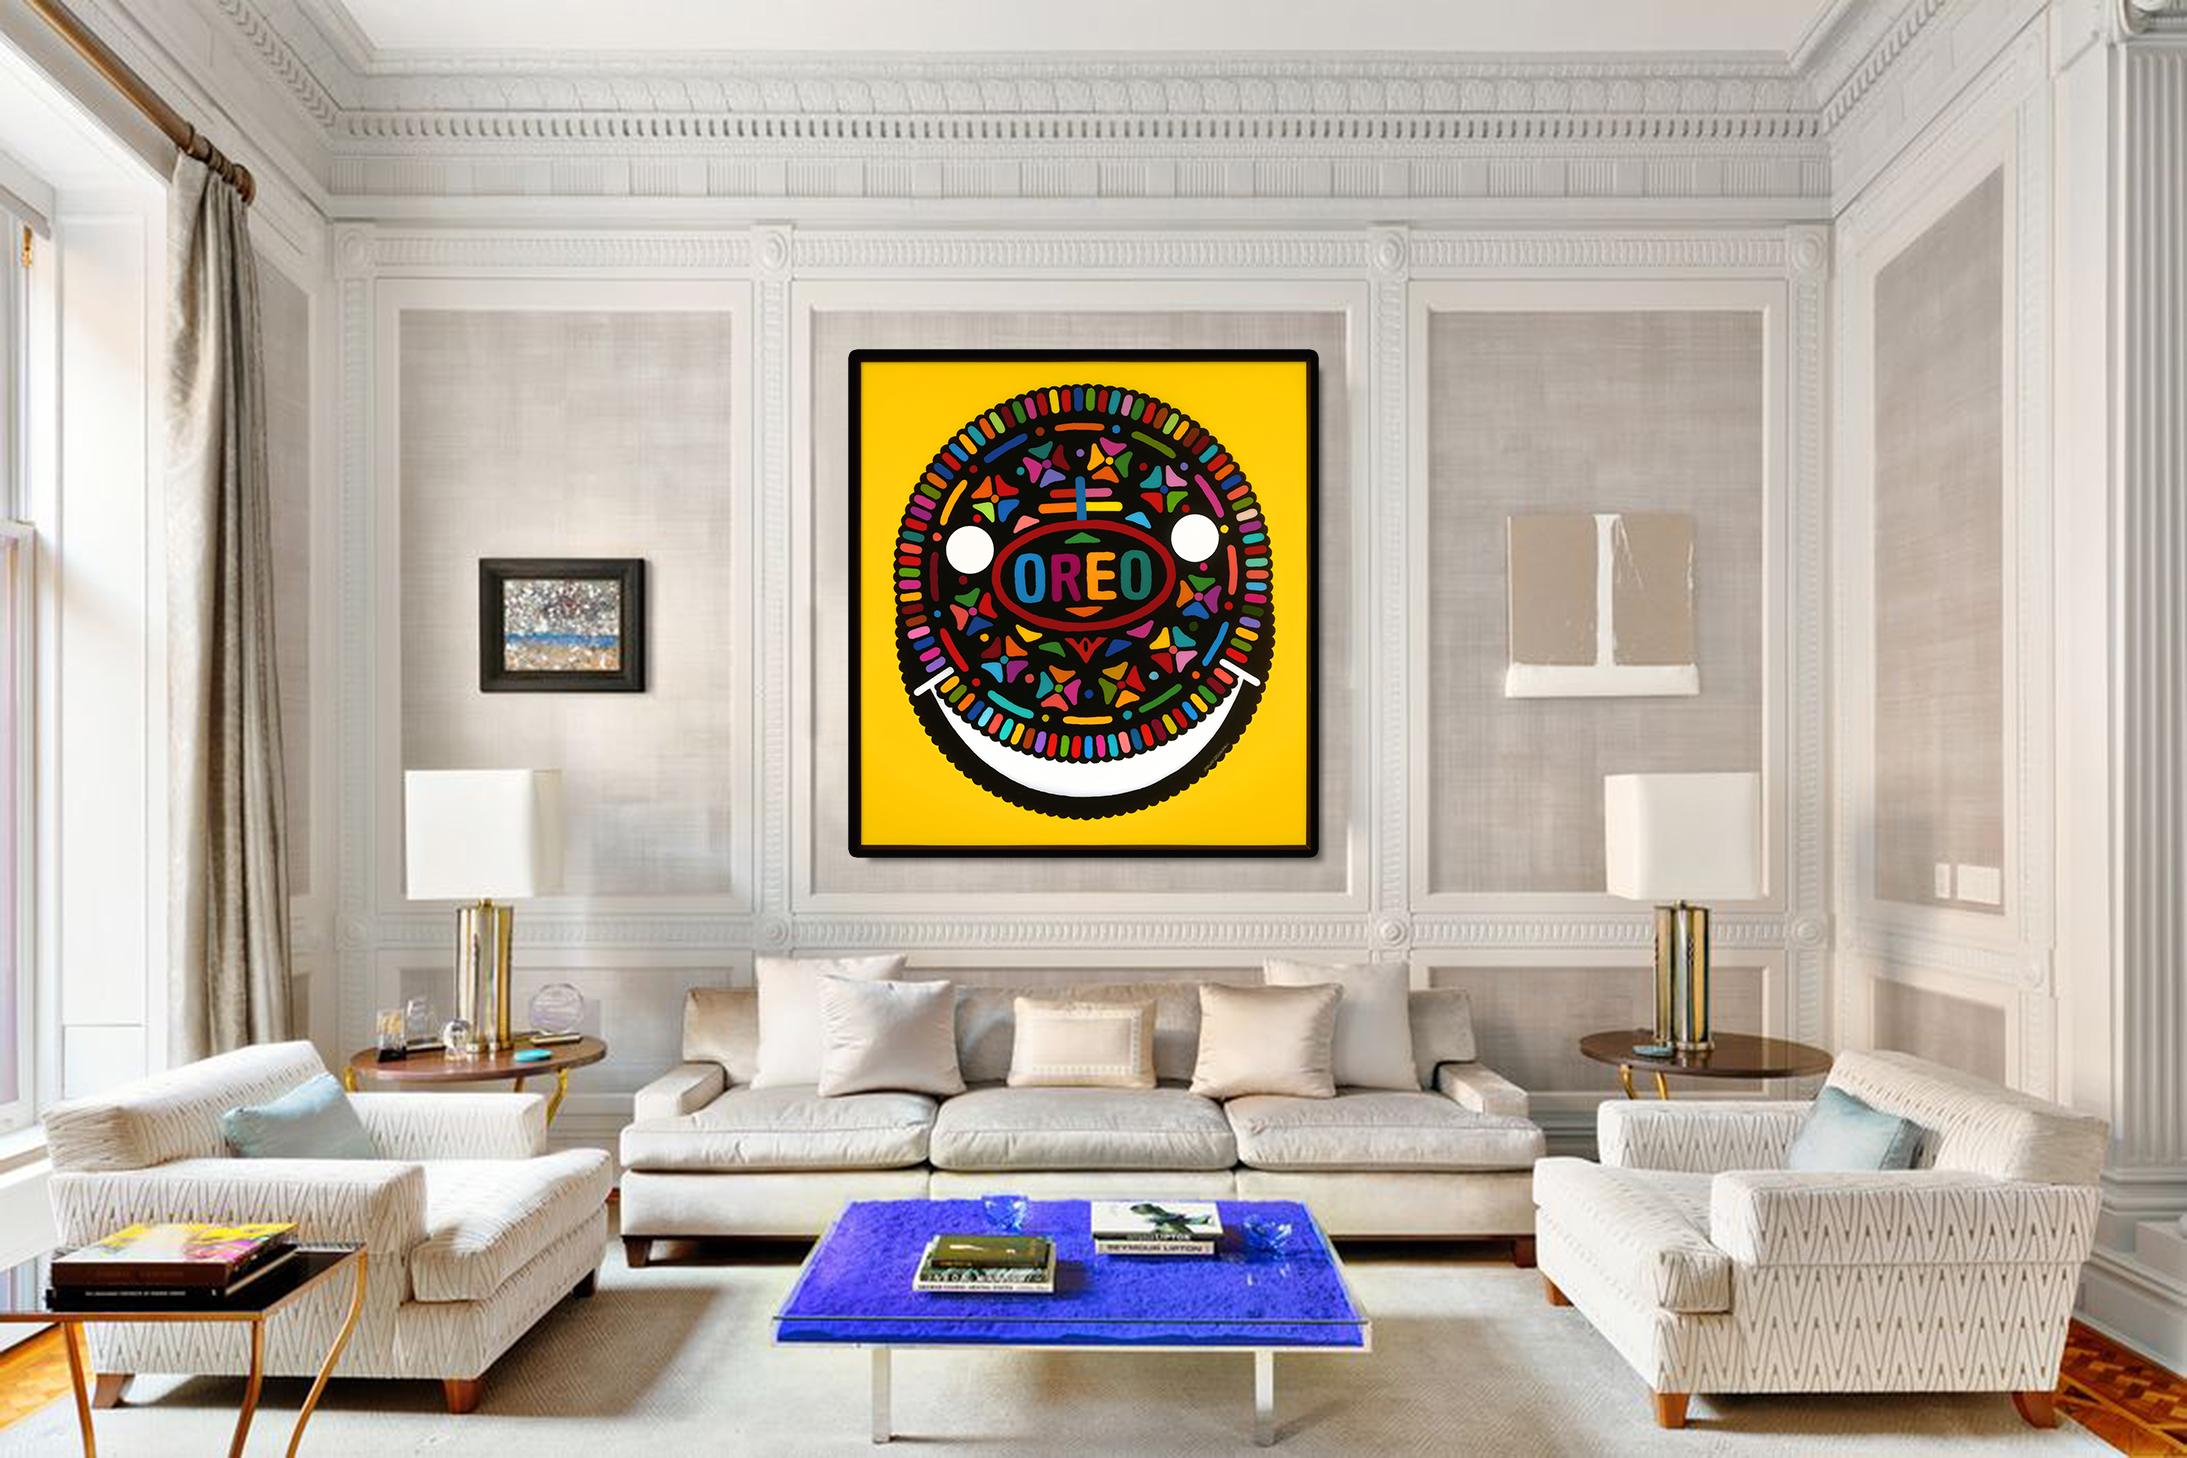 OREO HAPPY HOUR I (Limited Edition of only 30 prints) - Pop Art Print by Mauro Oliveira